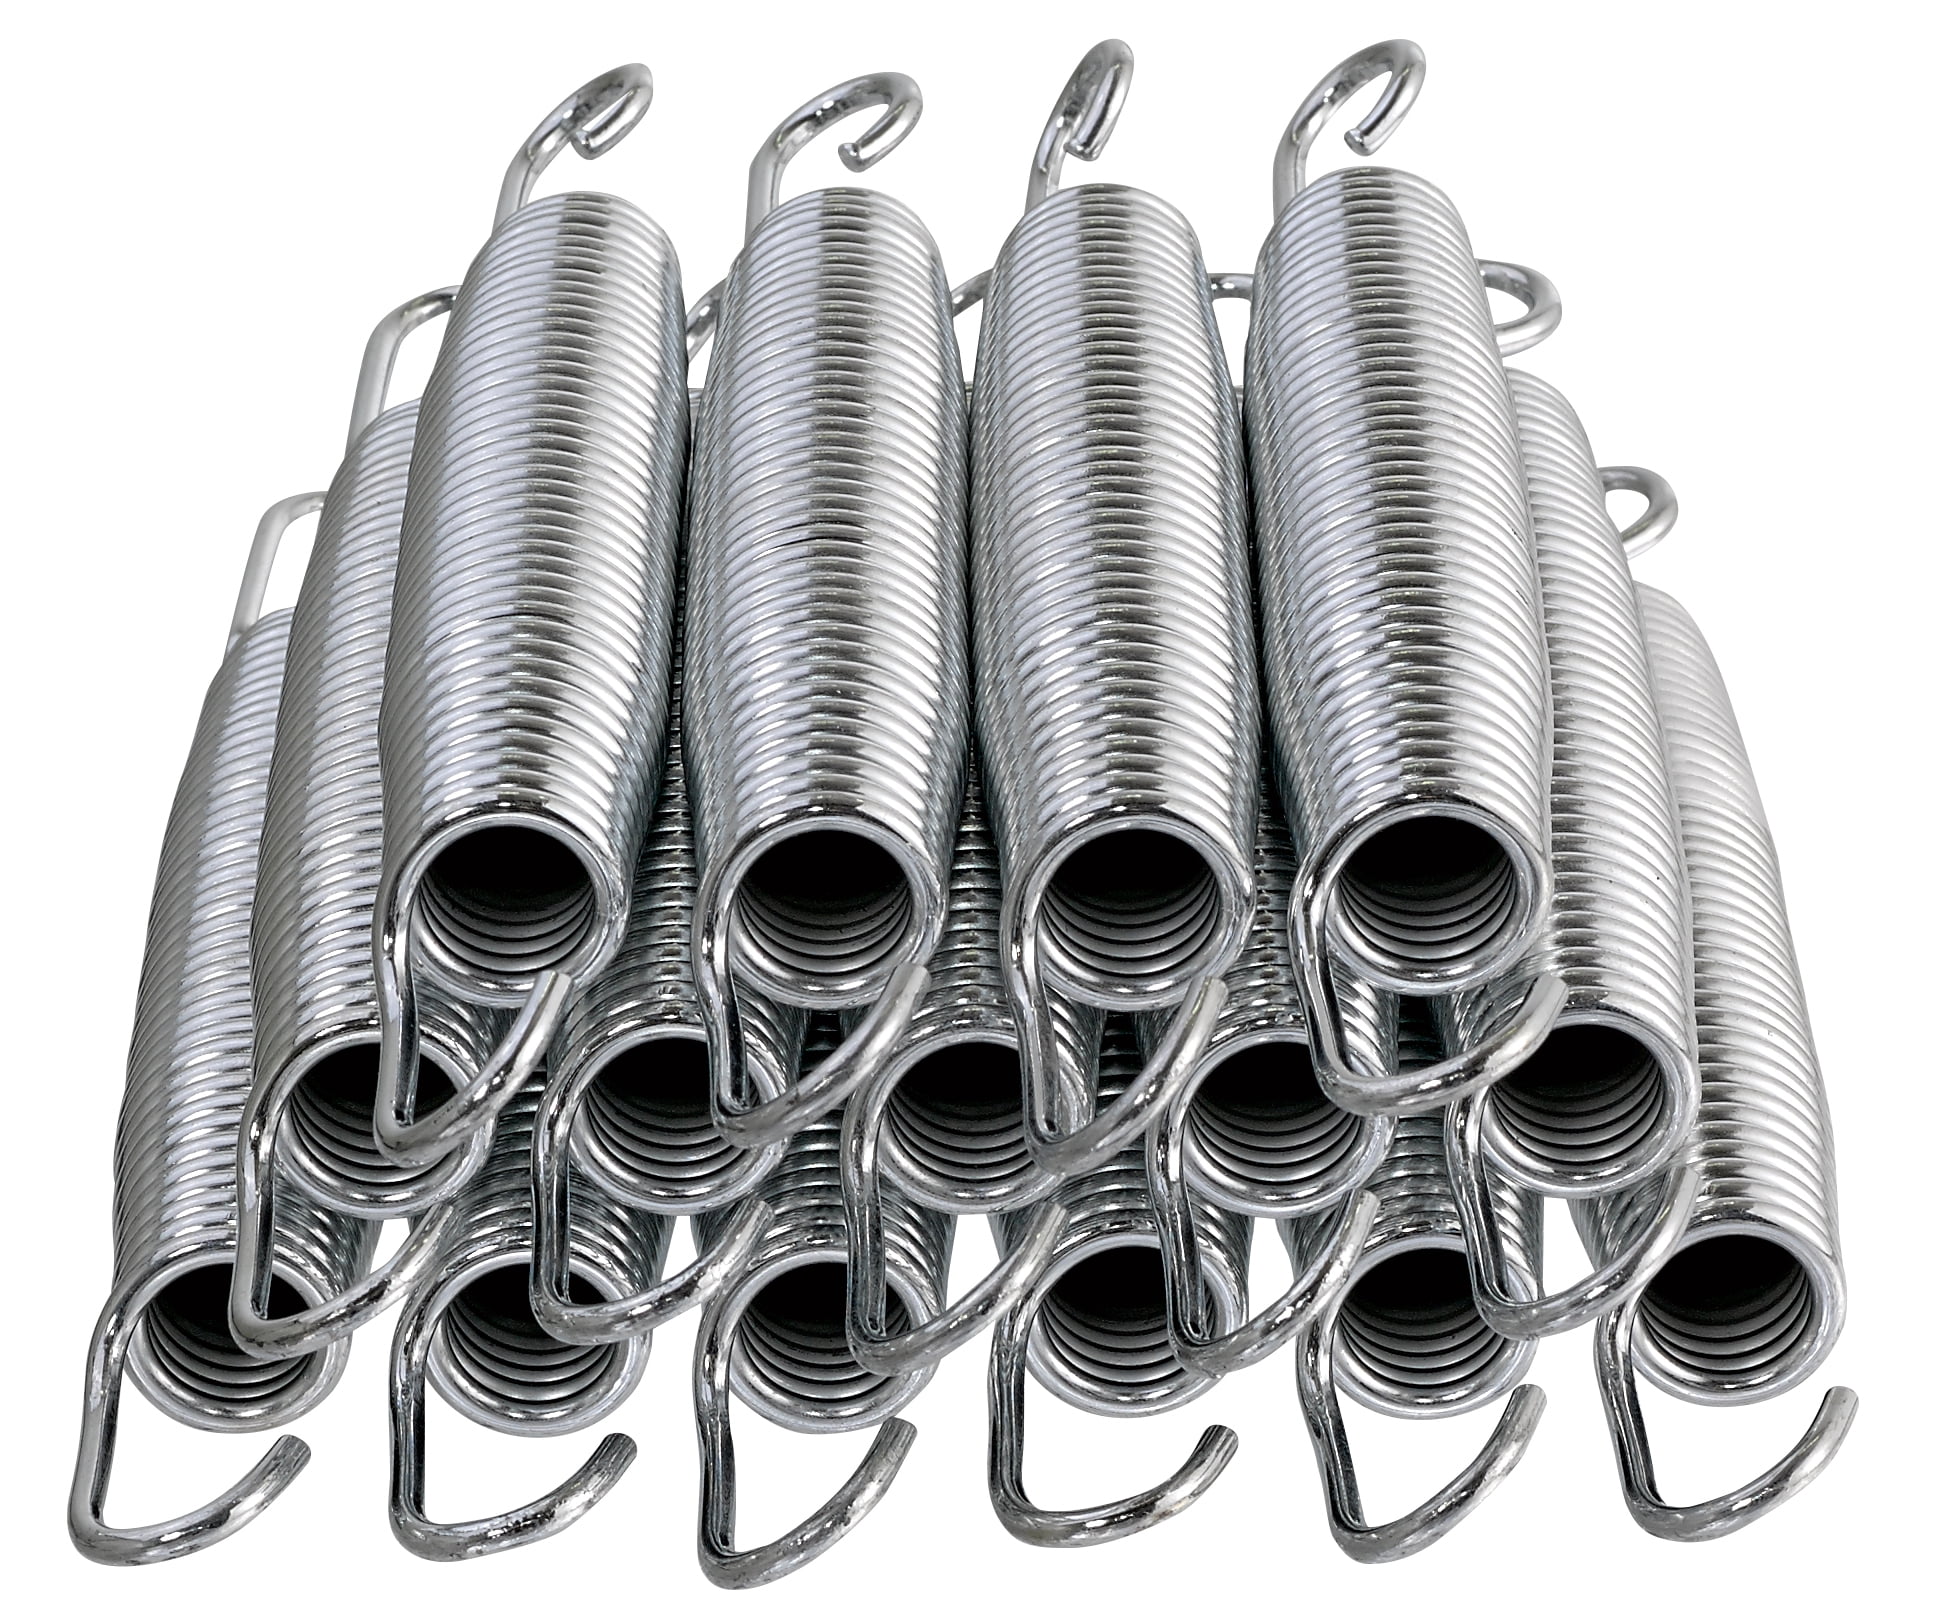 Details about   5.5 Inch Trampoline Springs Heavy Duty Stainless Steel Replacement Springs 90PCS 